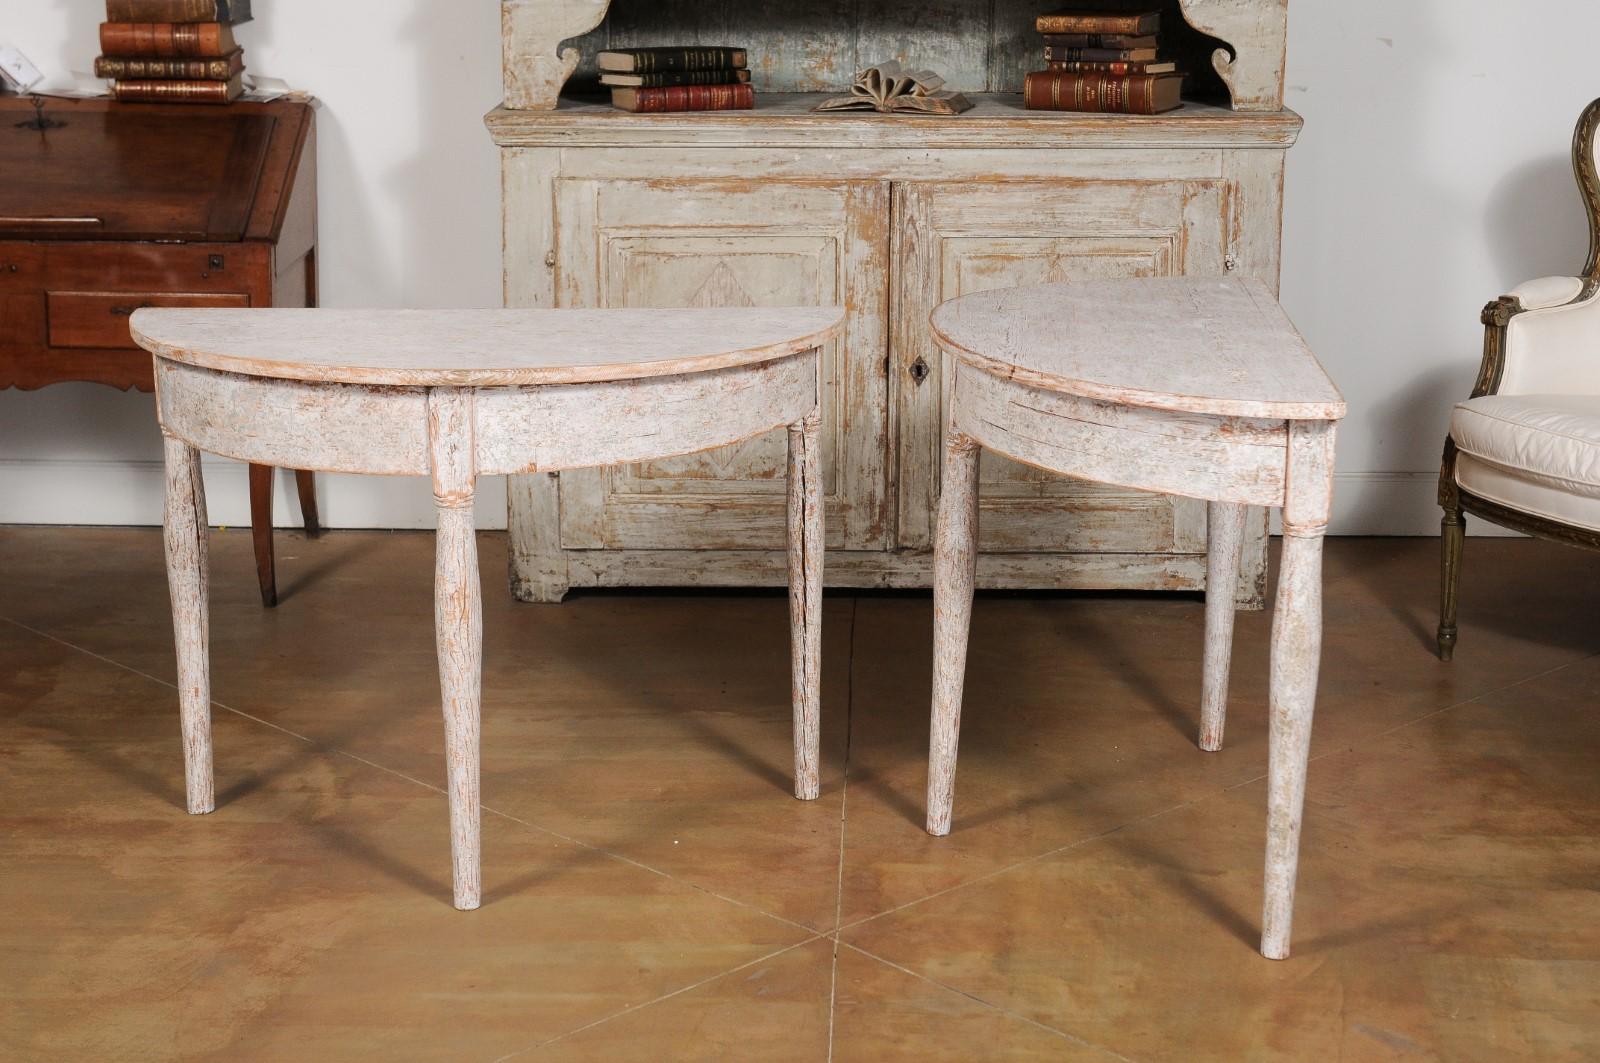 Pair of 1840s Swedish Painted Wood Demilune Tables with Distressed Finish 6